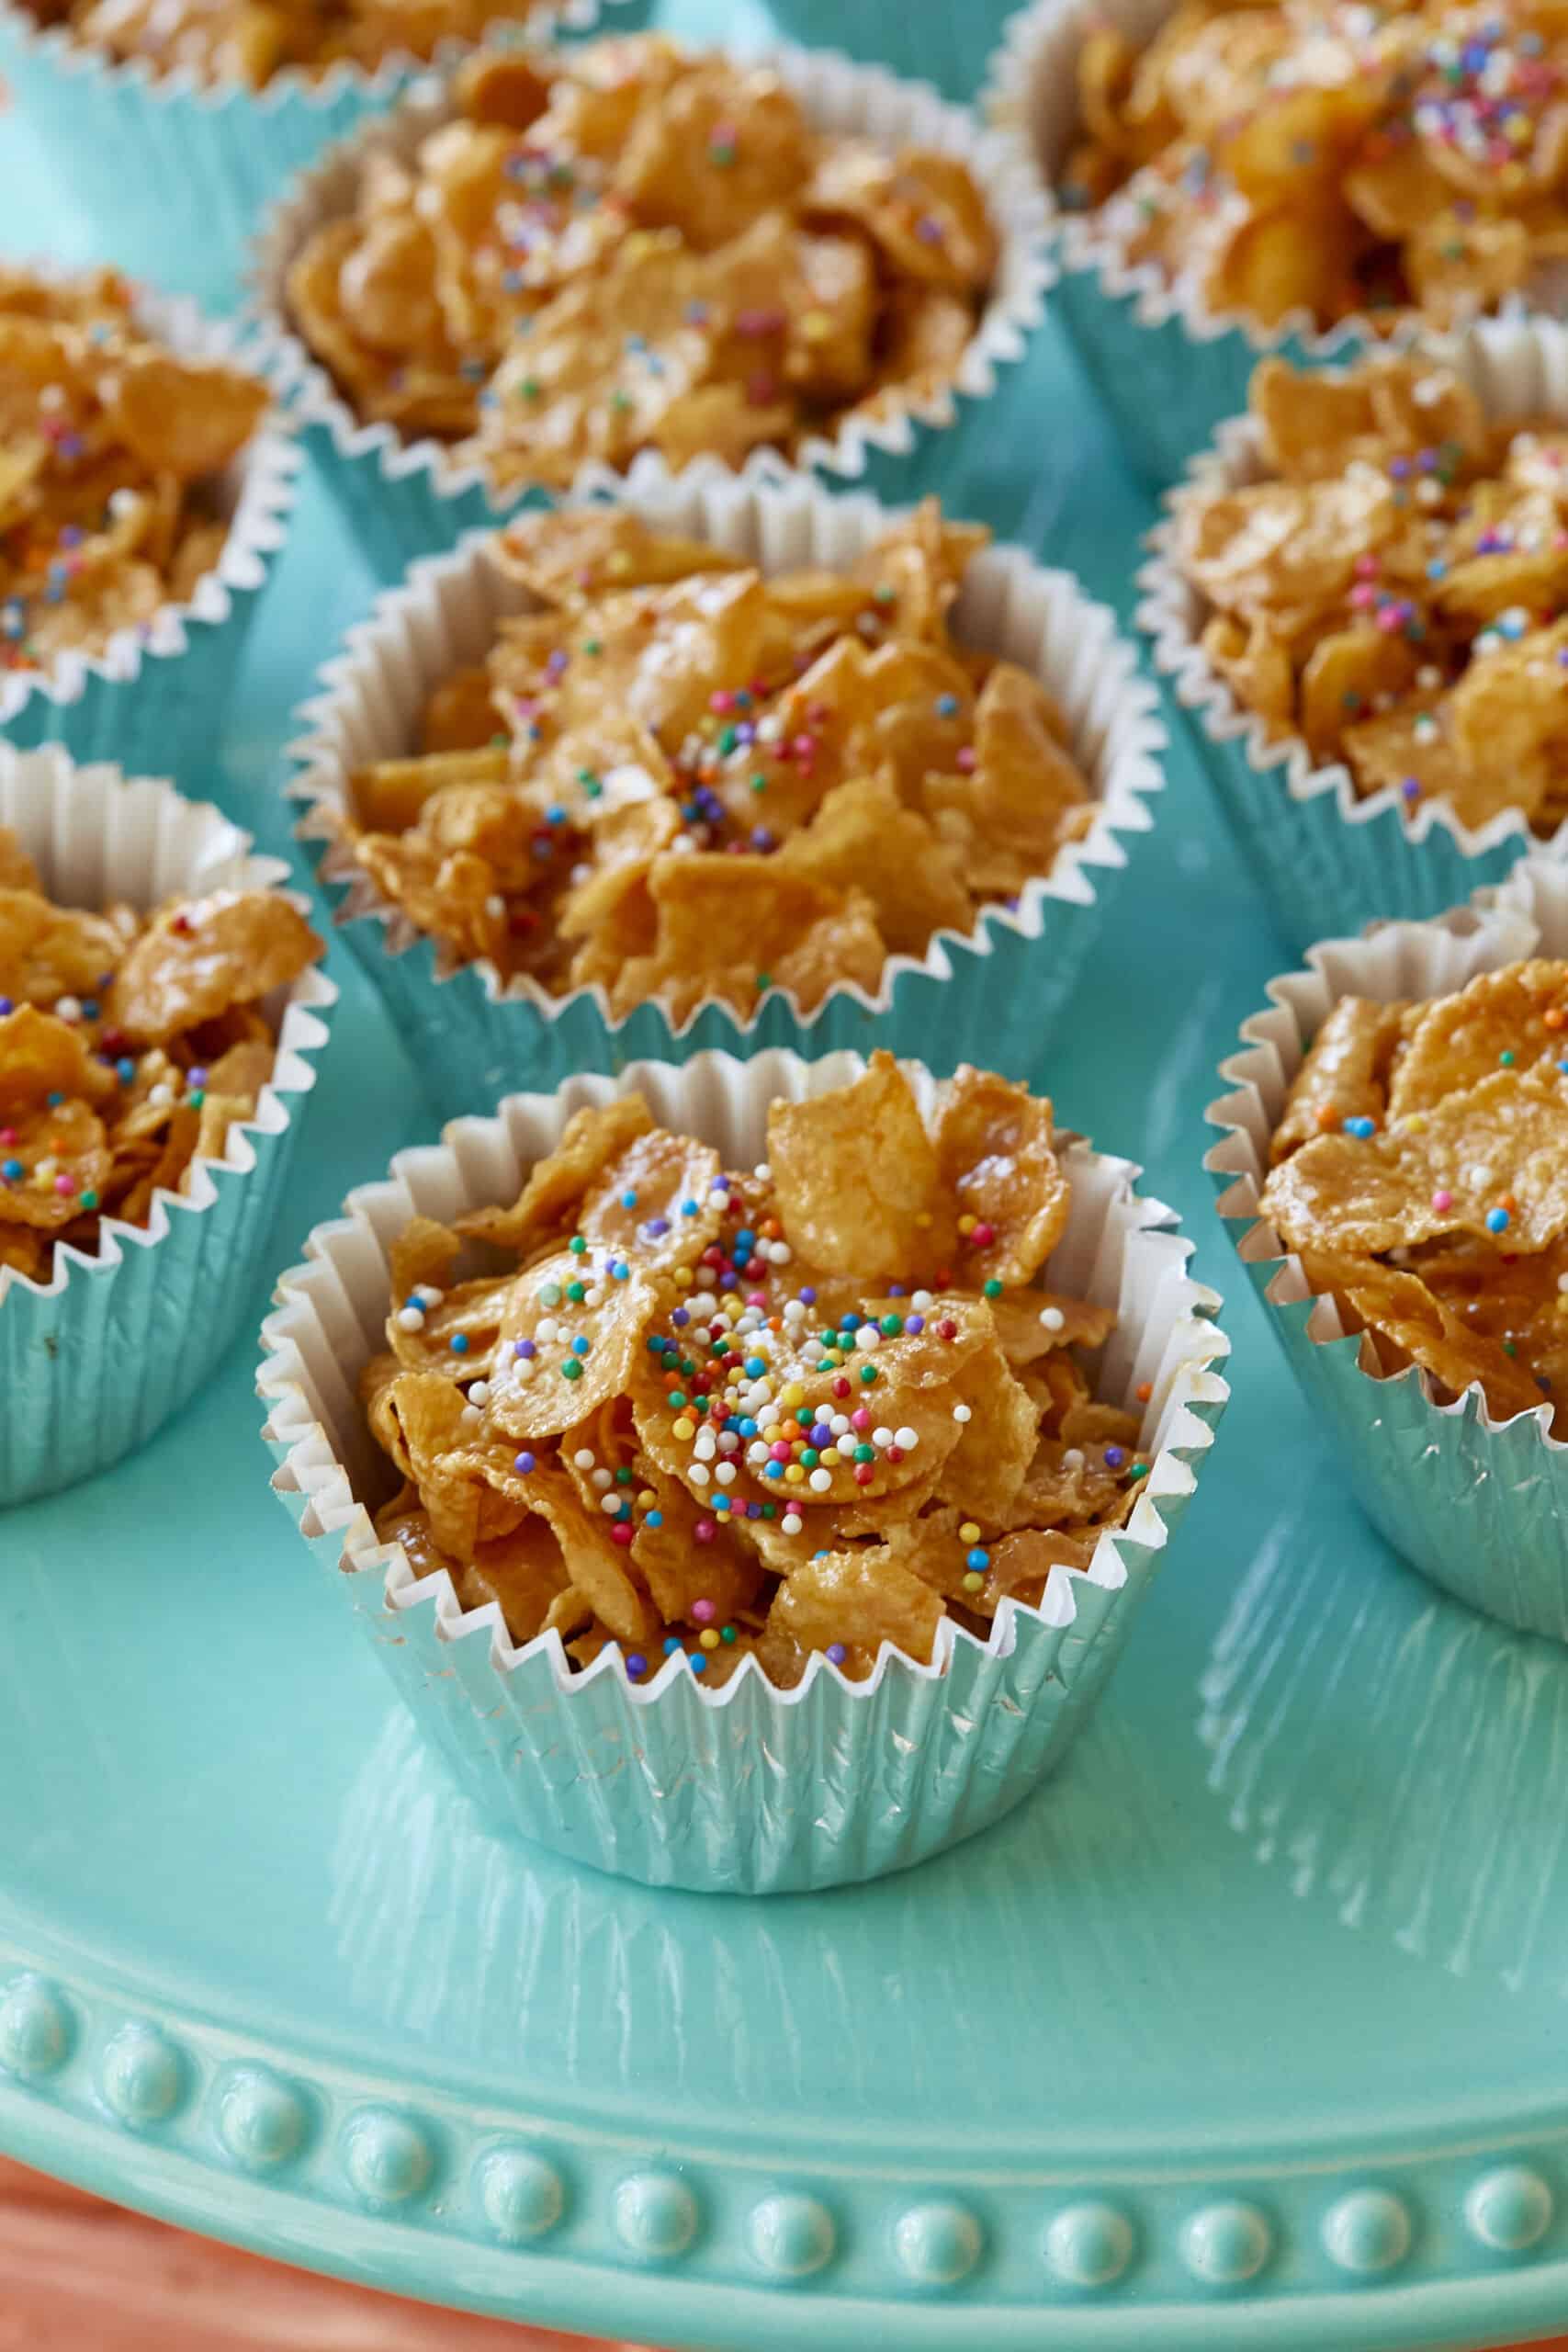 Australian Honey Joys are baked until crisp in cupcake cups then they are decorated with sprinkles.